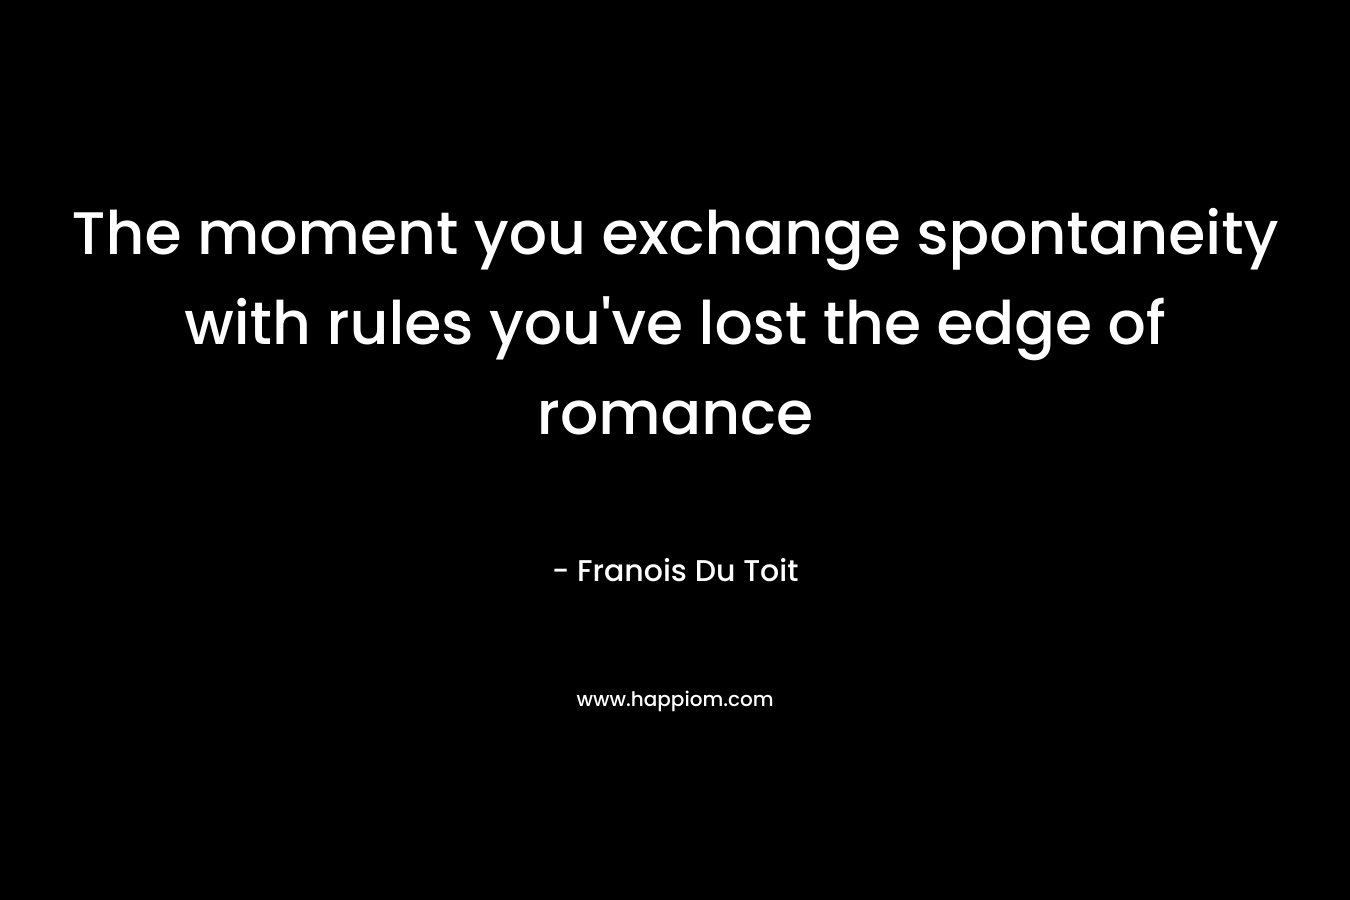 The moment you exchange spontaneity with rules you've lost the edge of romance